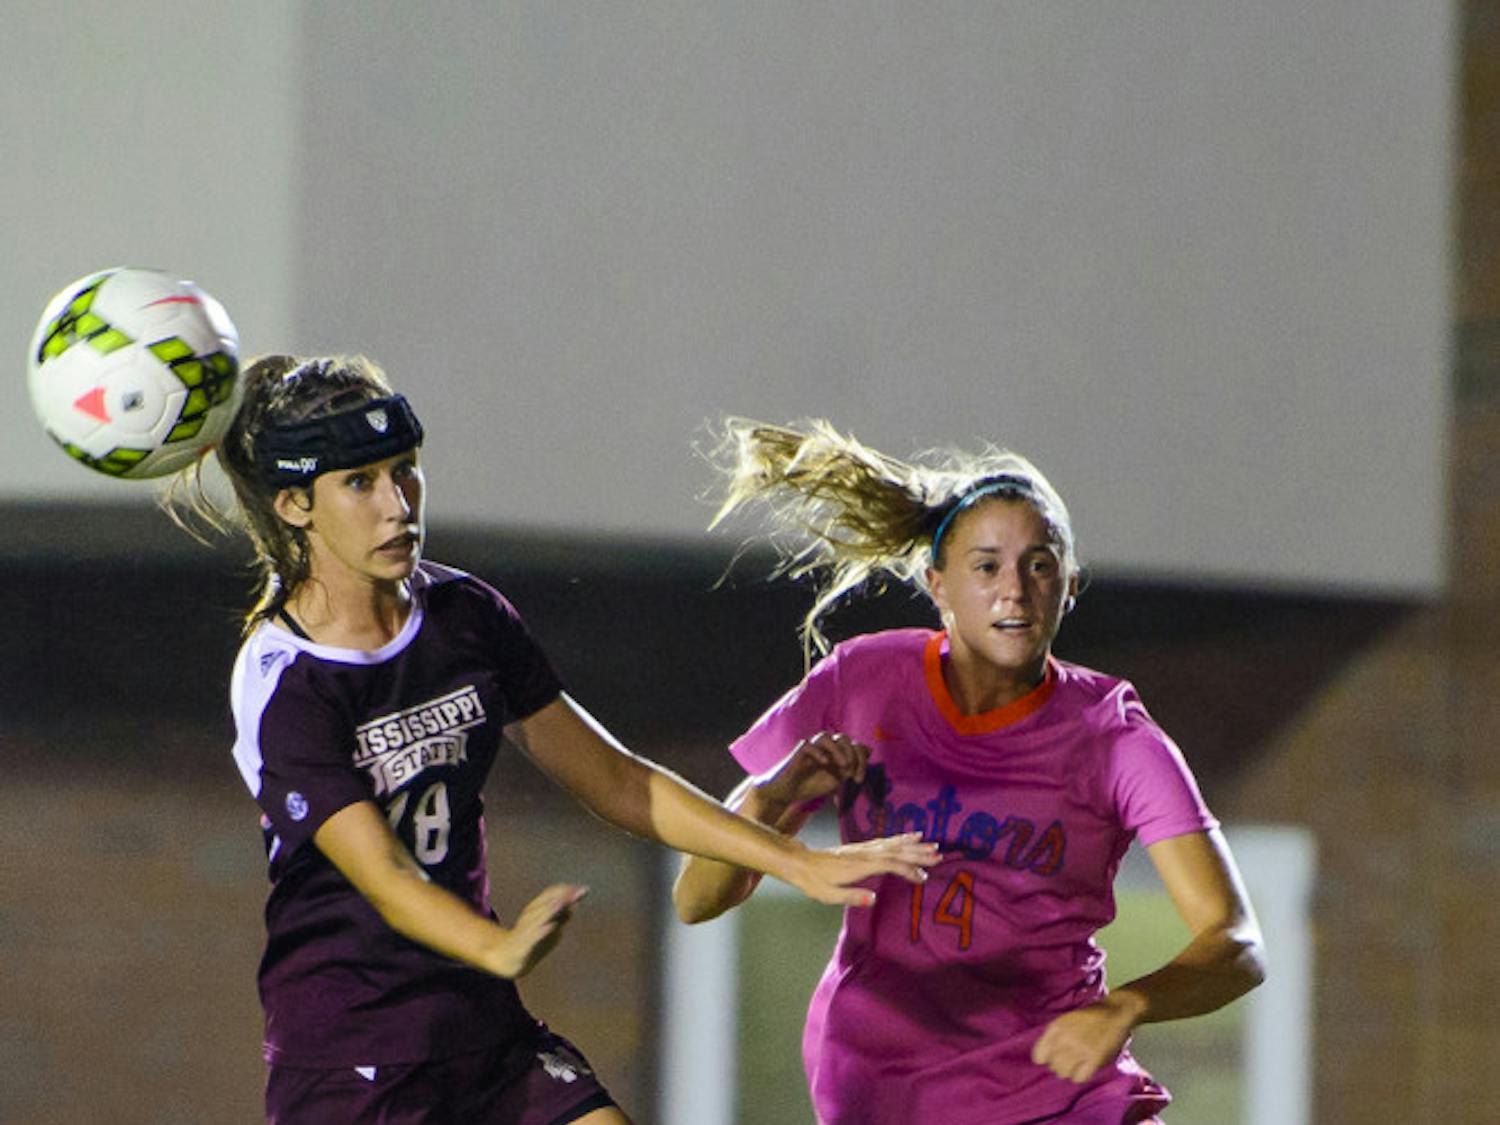 Jillian Graff heads the ball during Florida's 5-1 win against Mississippi State